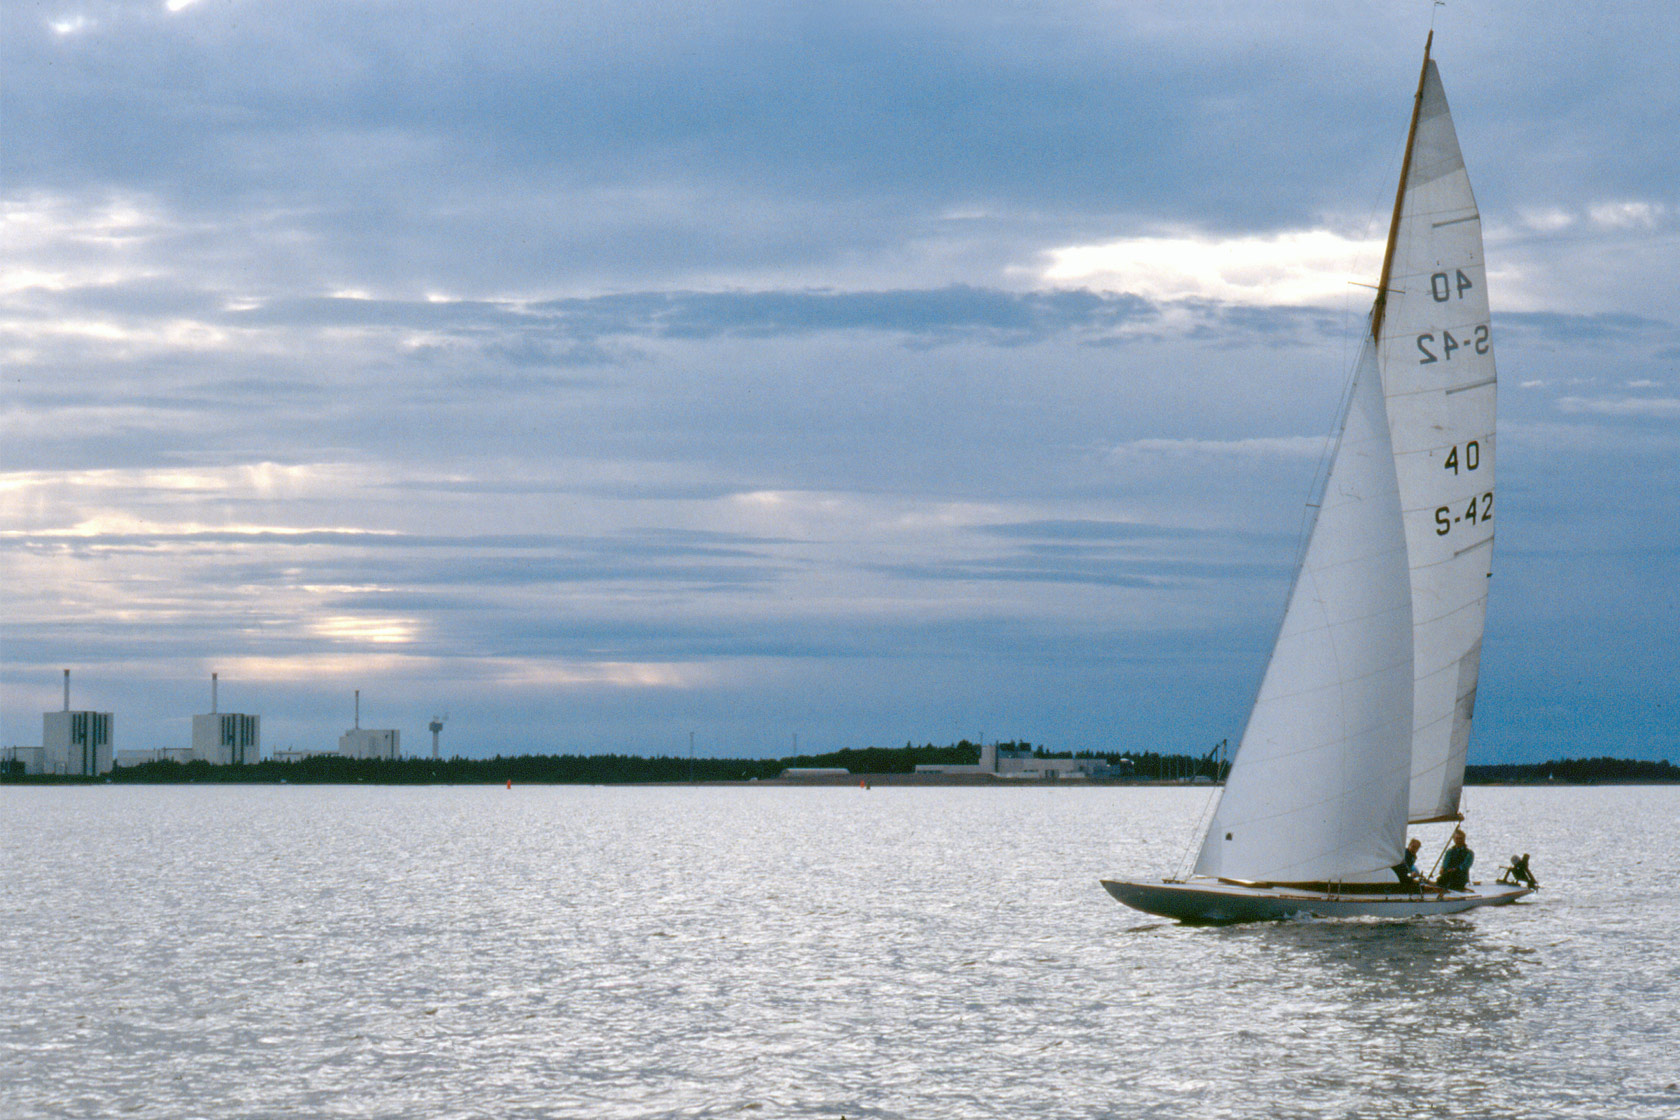 A sail boat at sea outside Forsmark